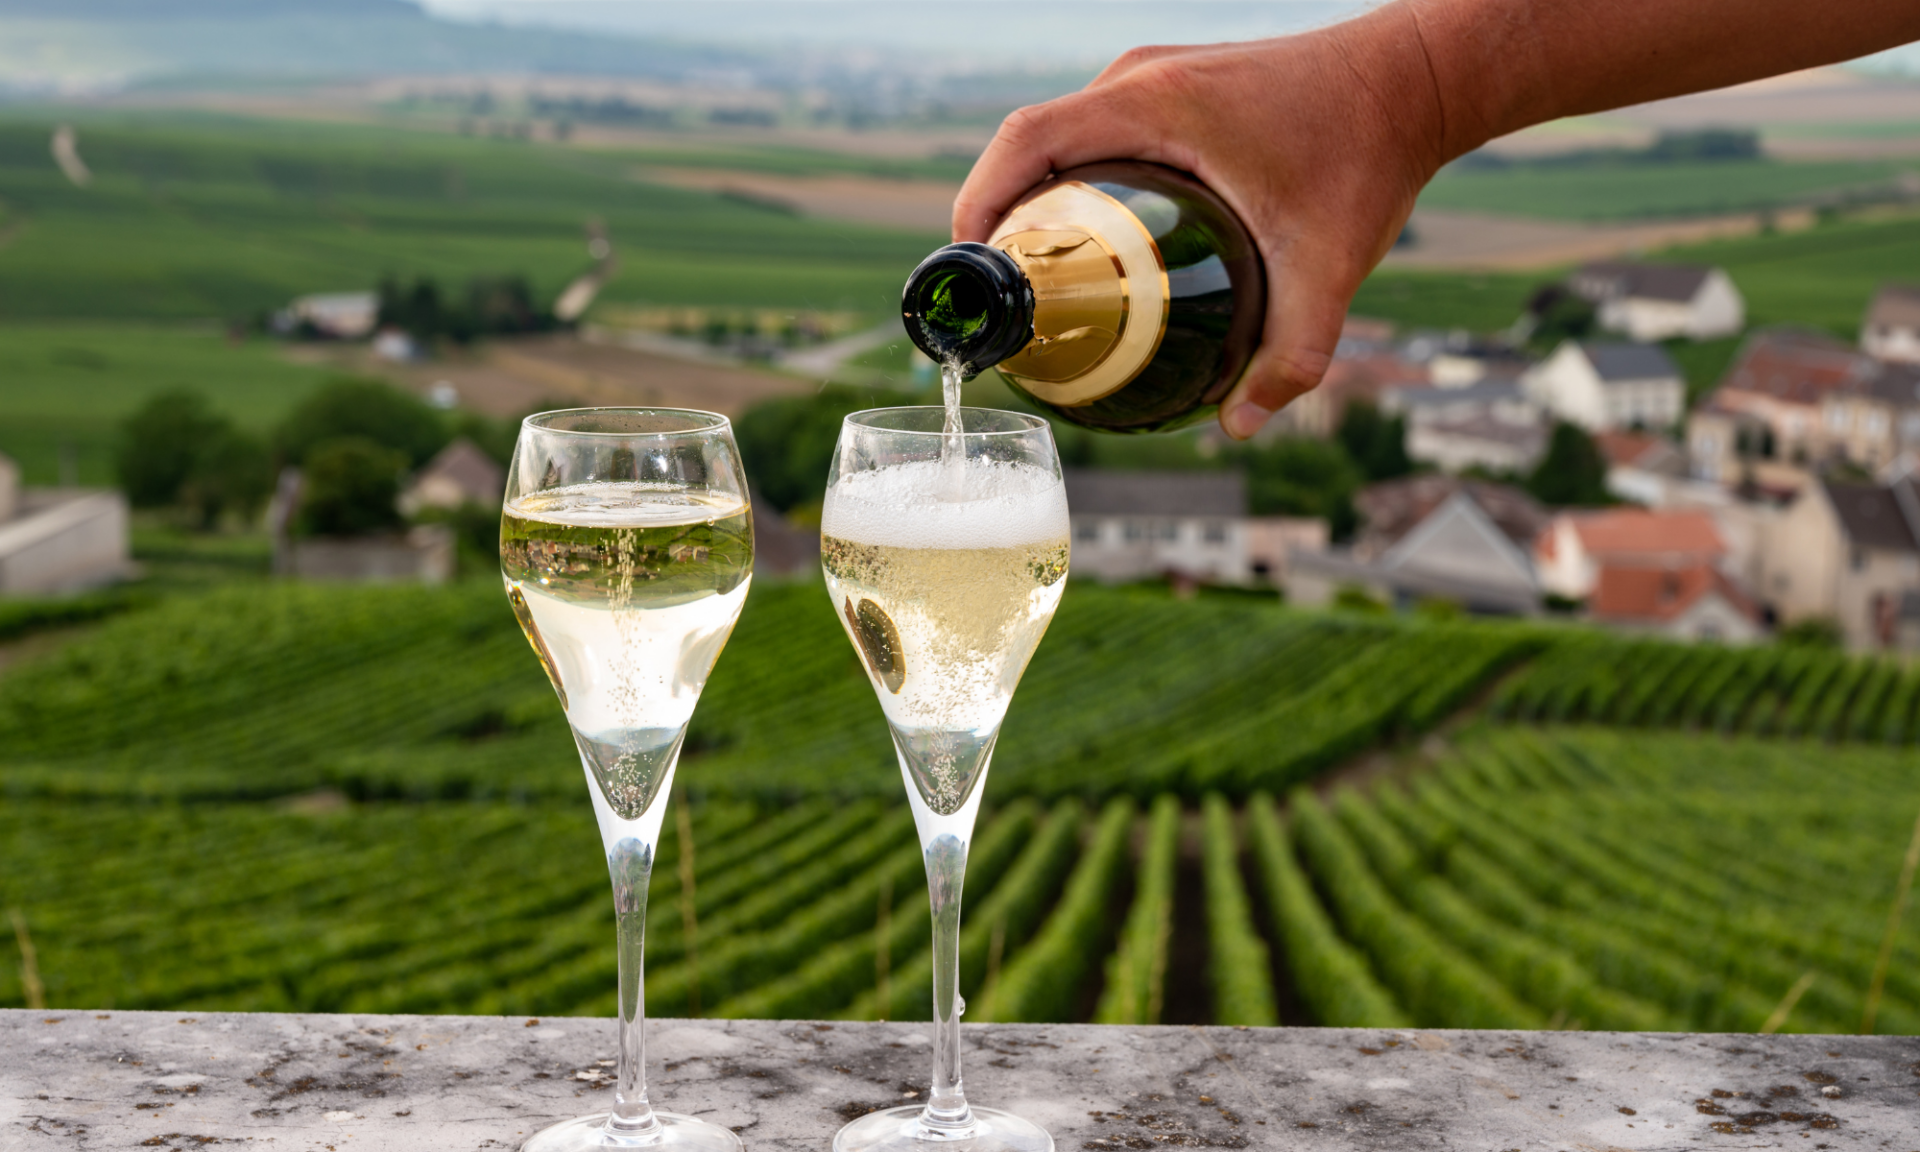 Pouring two glasses of champagne at an in-person wine tasting